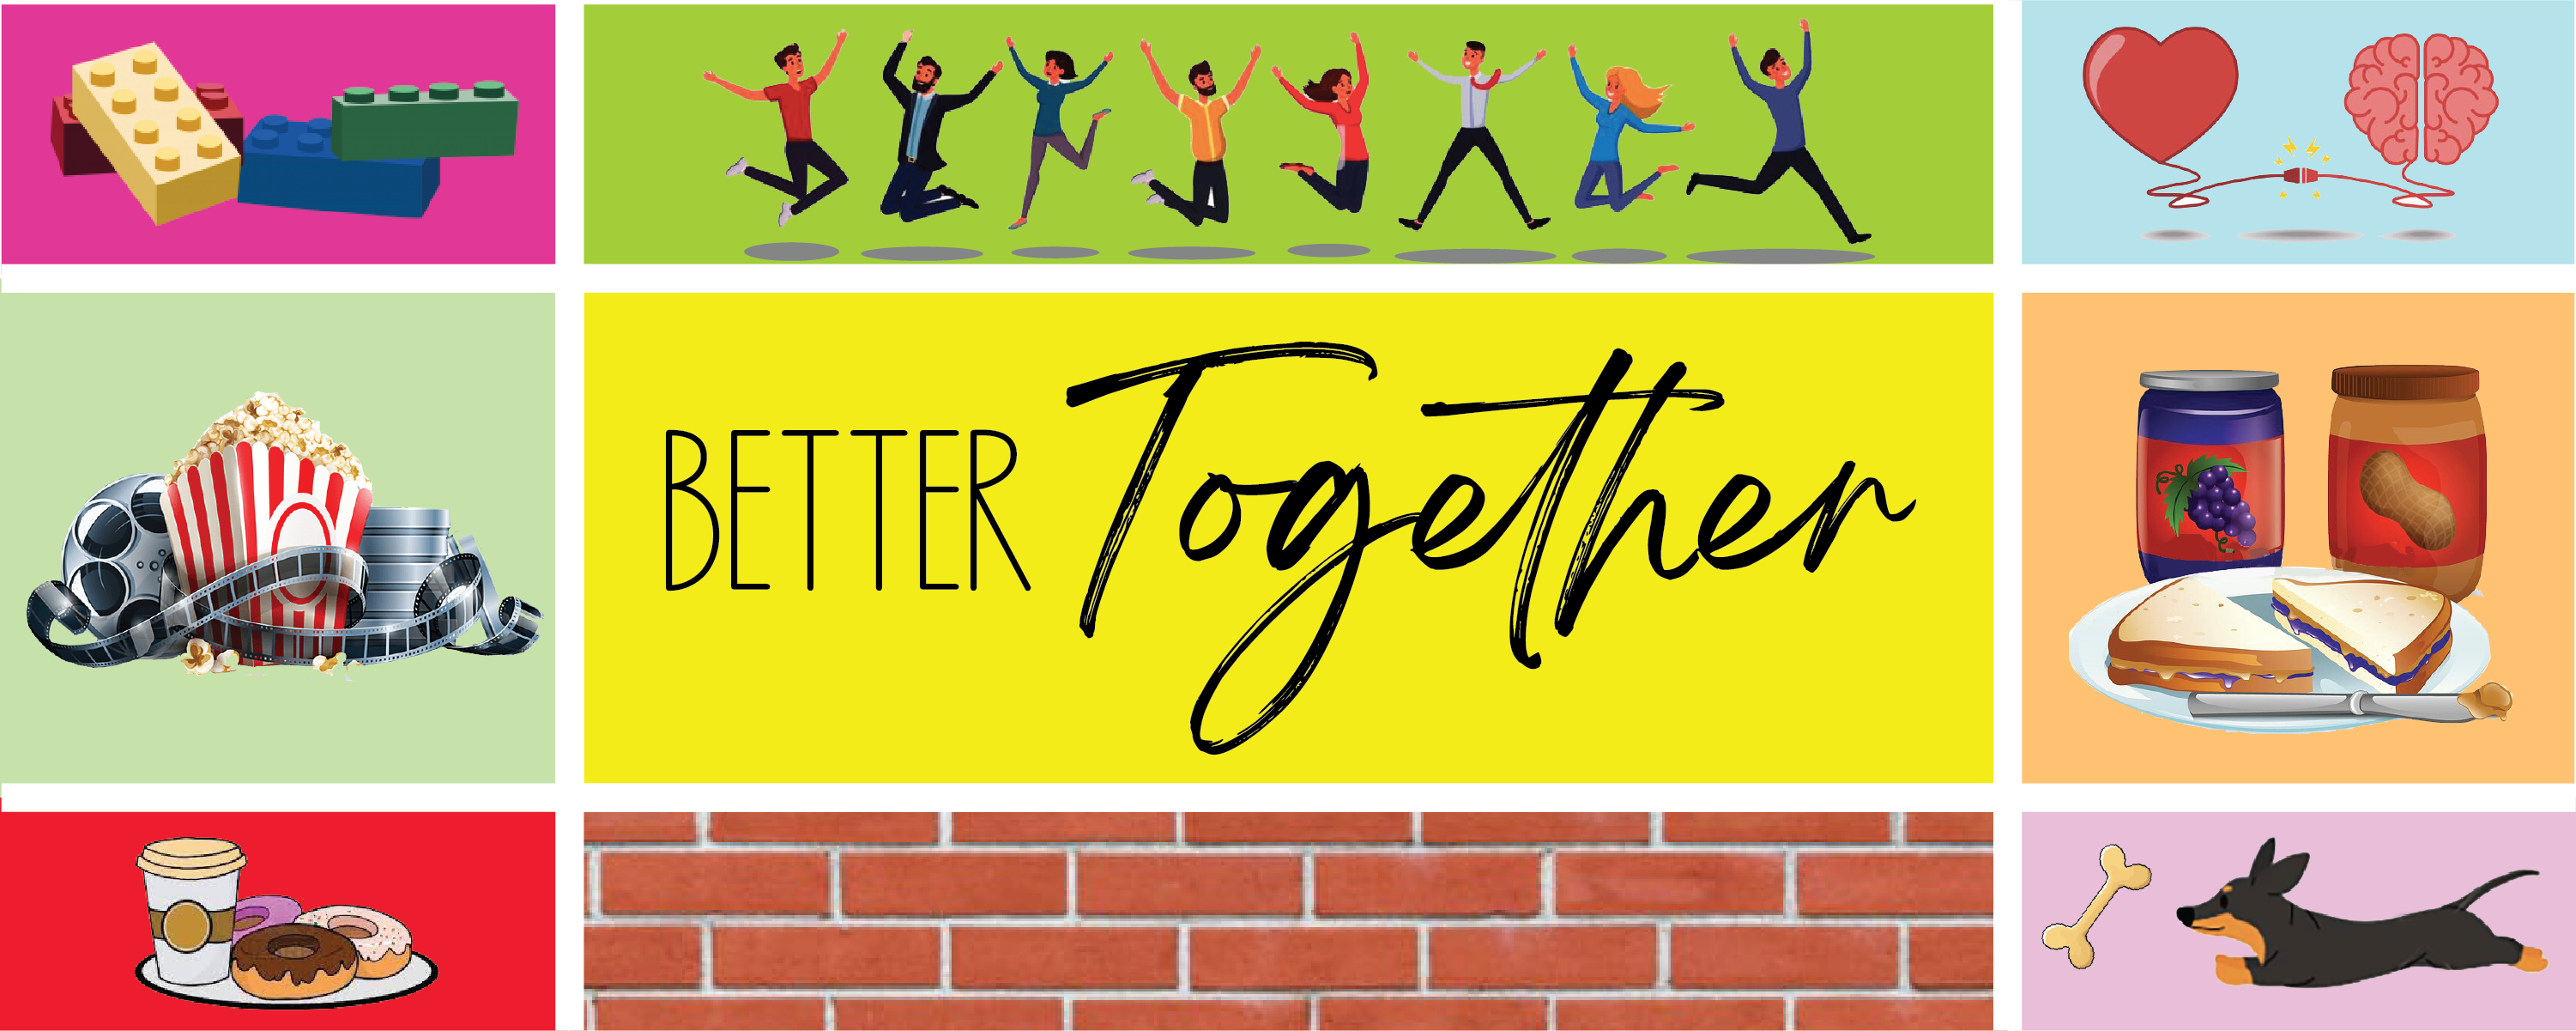 “Either ____ Or ____” – Better Together